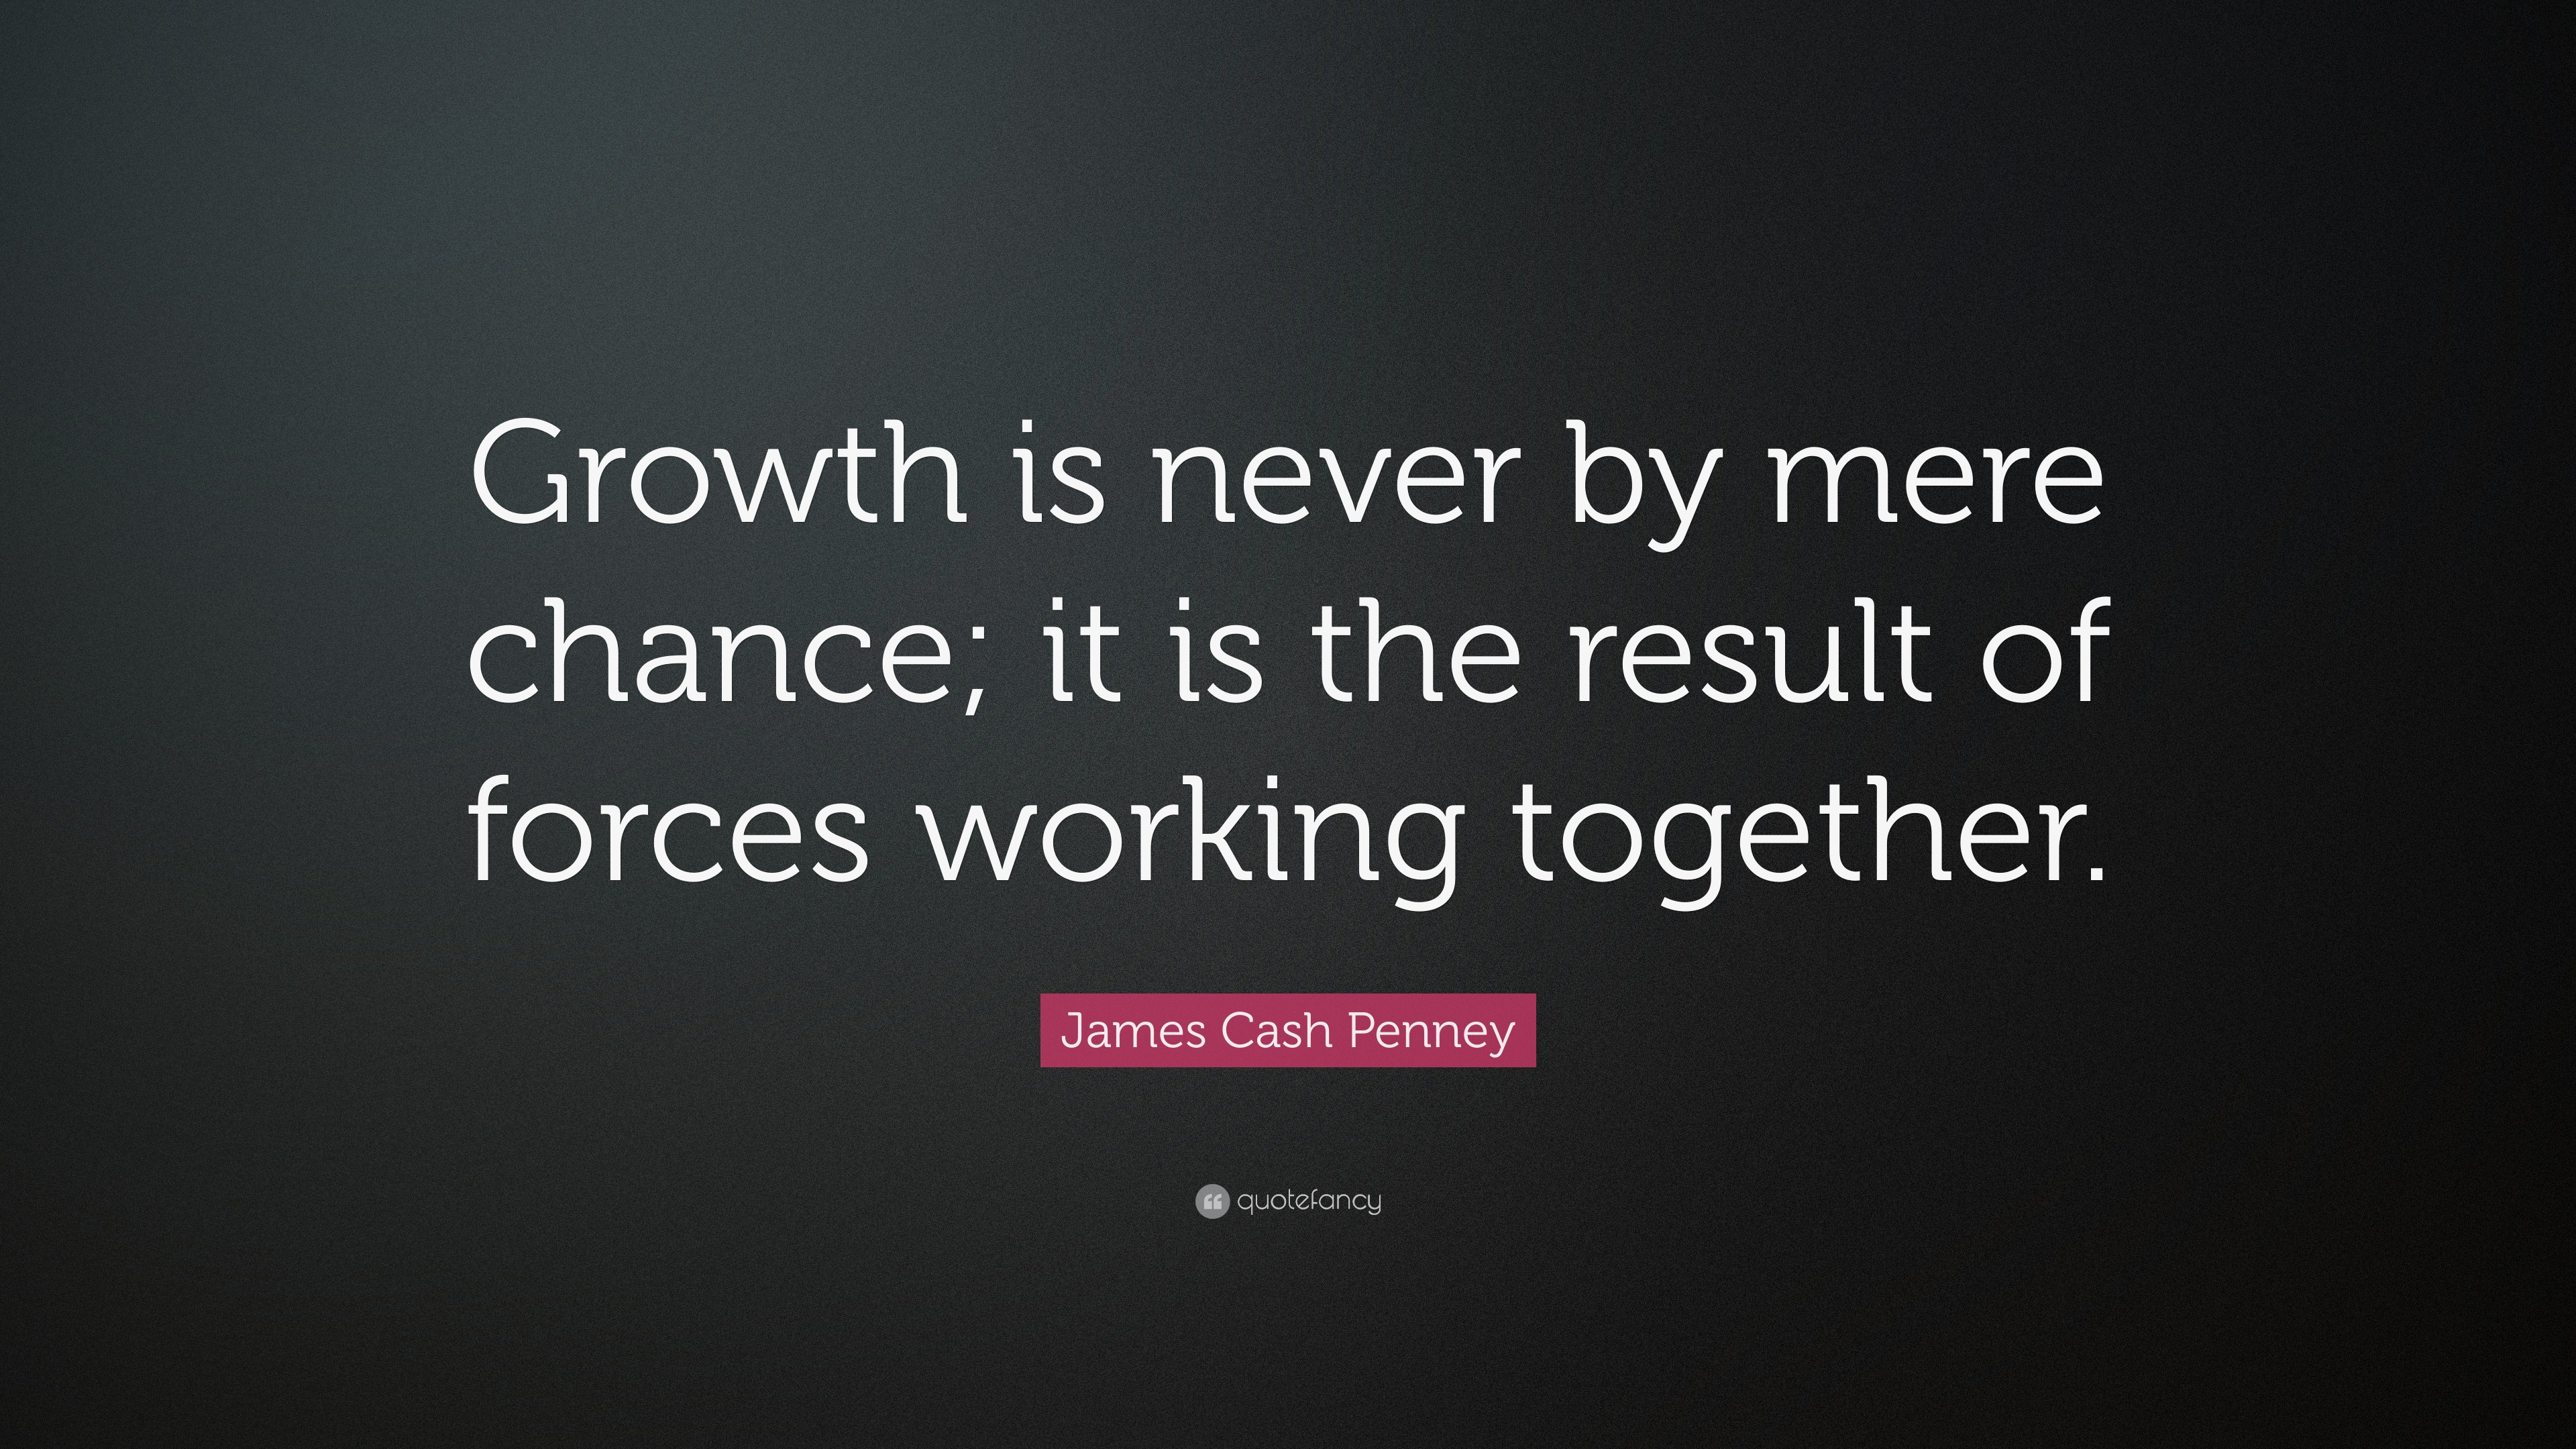 James Cash Penney Quote: “Growth is never by mere chance; it is the ...